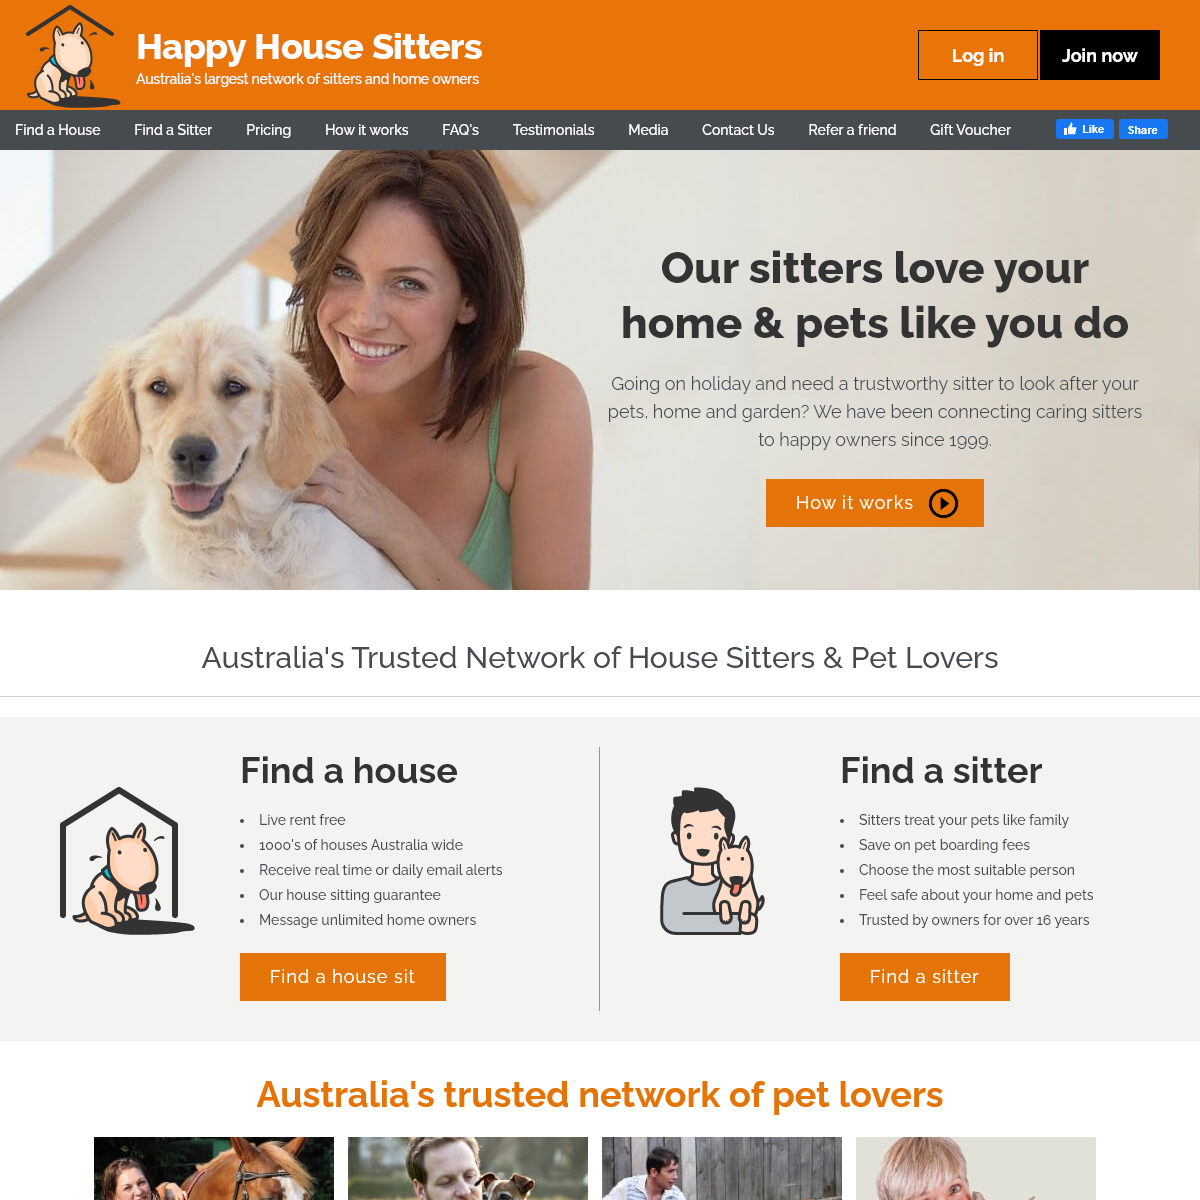 A complete backup of happyhousesitters.com.au